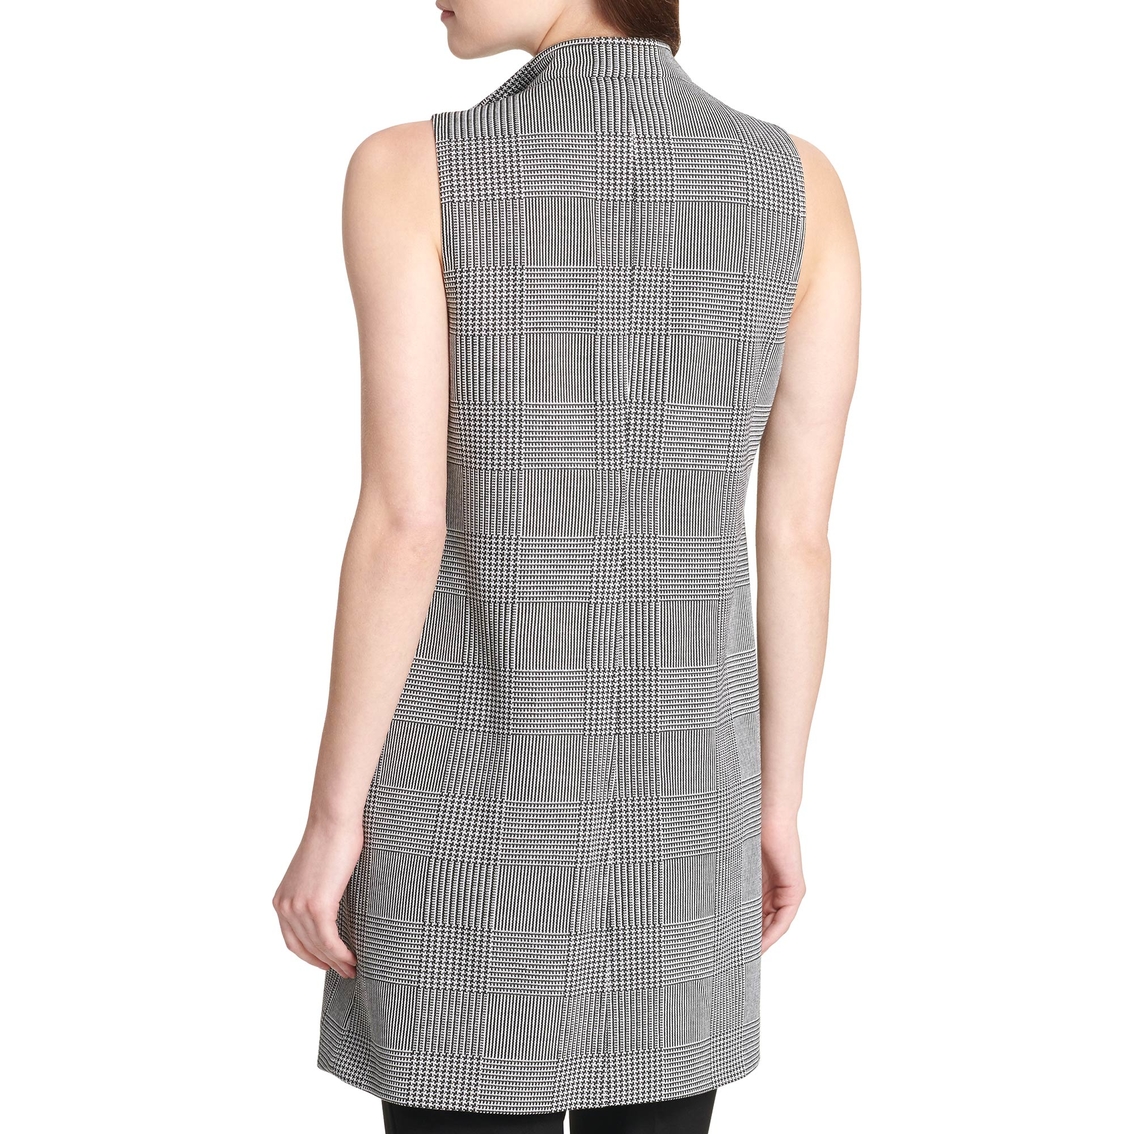 Calvin Klein Collection Glen Plaid Vest with Zippers - Image 2 of 3